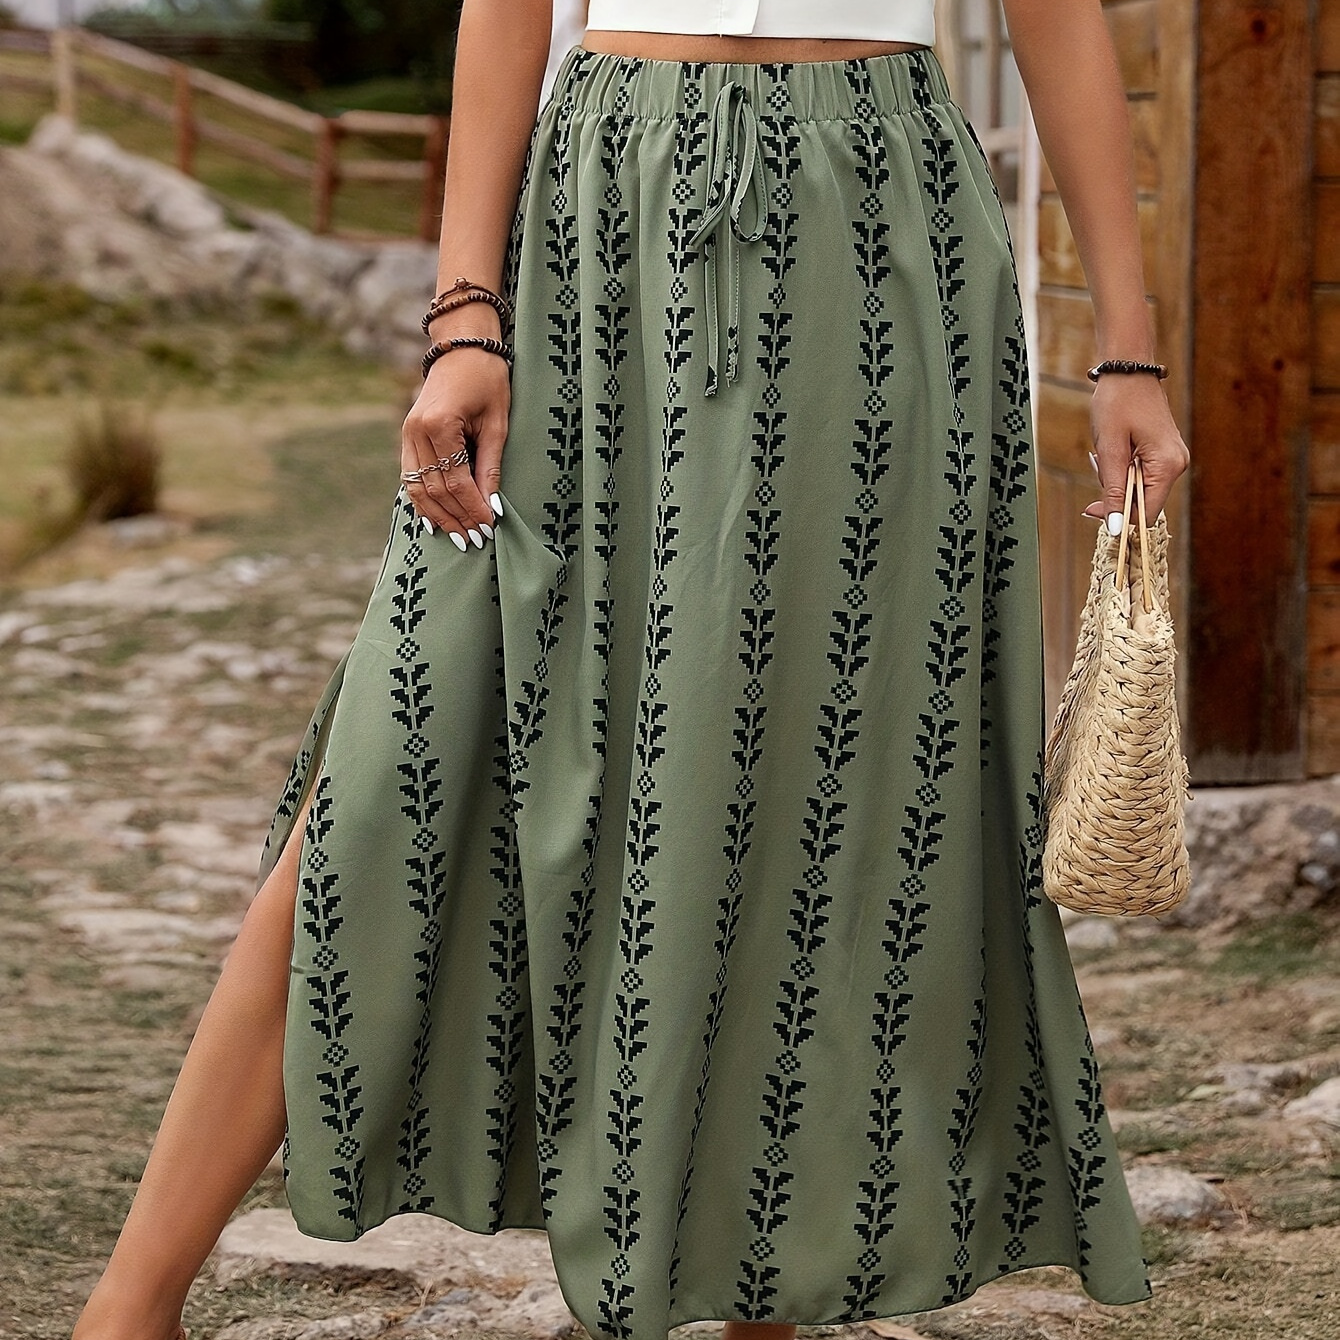 

Ethnic Print Tied Skirt, Vintage High Wait Swing Vacation Style Skirt, Women's Clothing